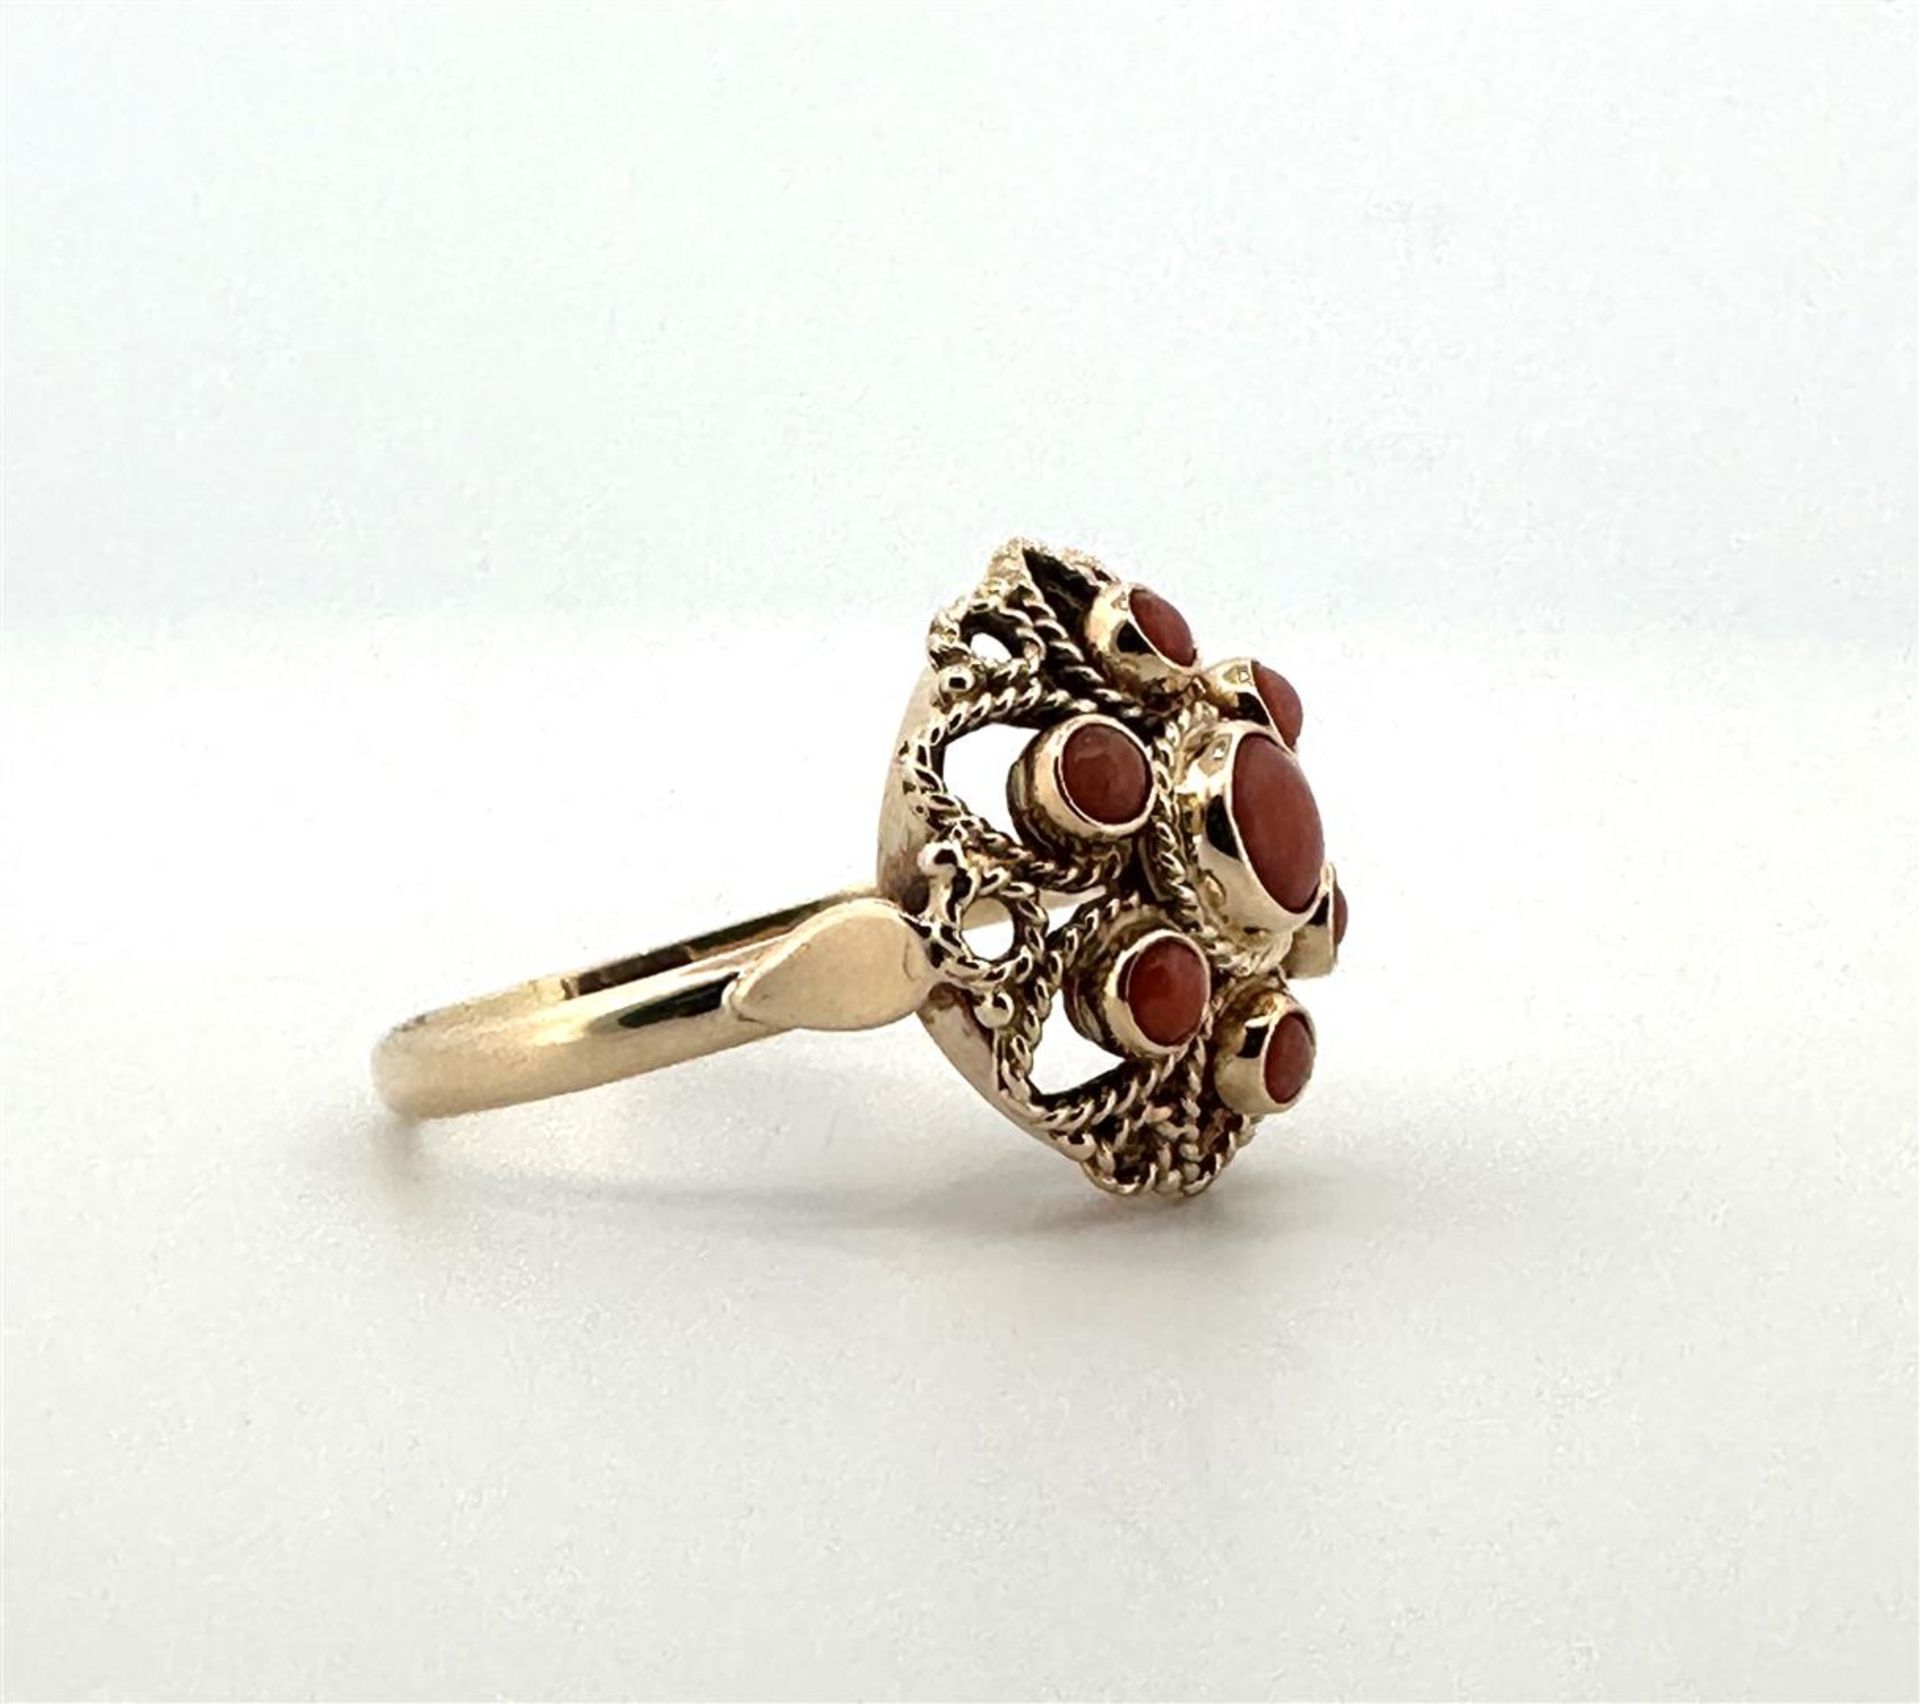 14kt rose gold rosette ring set with red coral.
The ring is gracefully finished with twisted wire an - Image 4 of 5